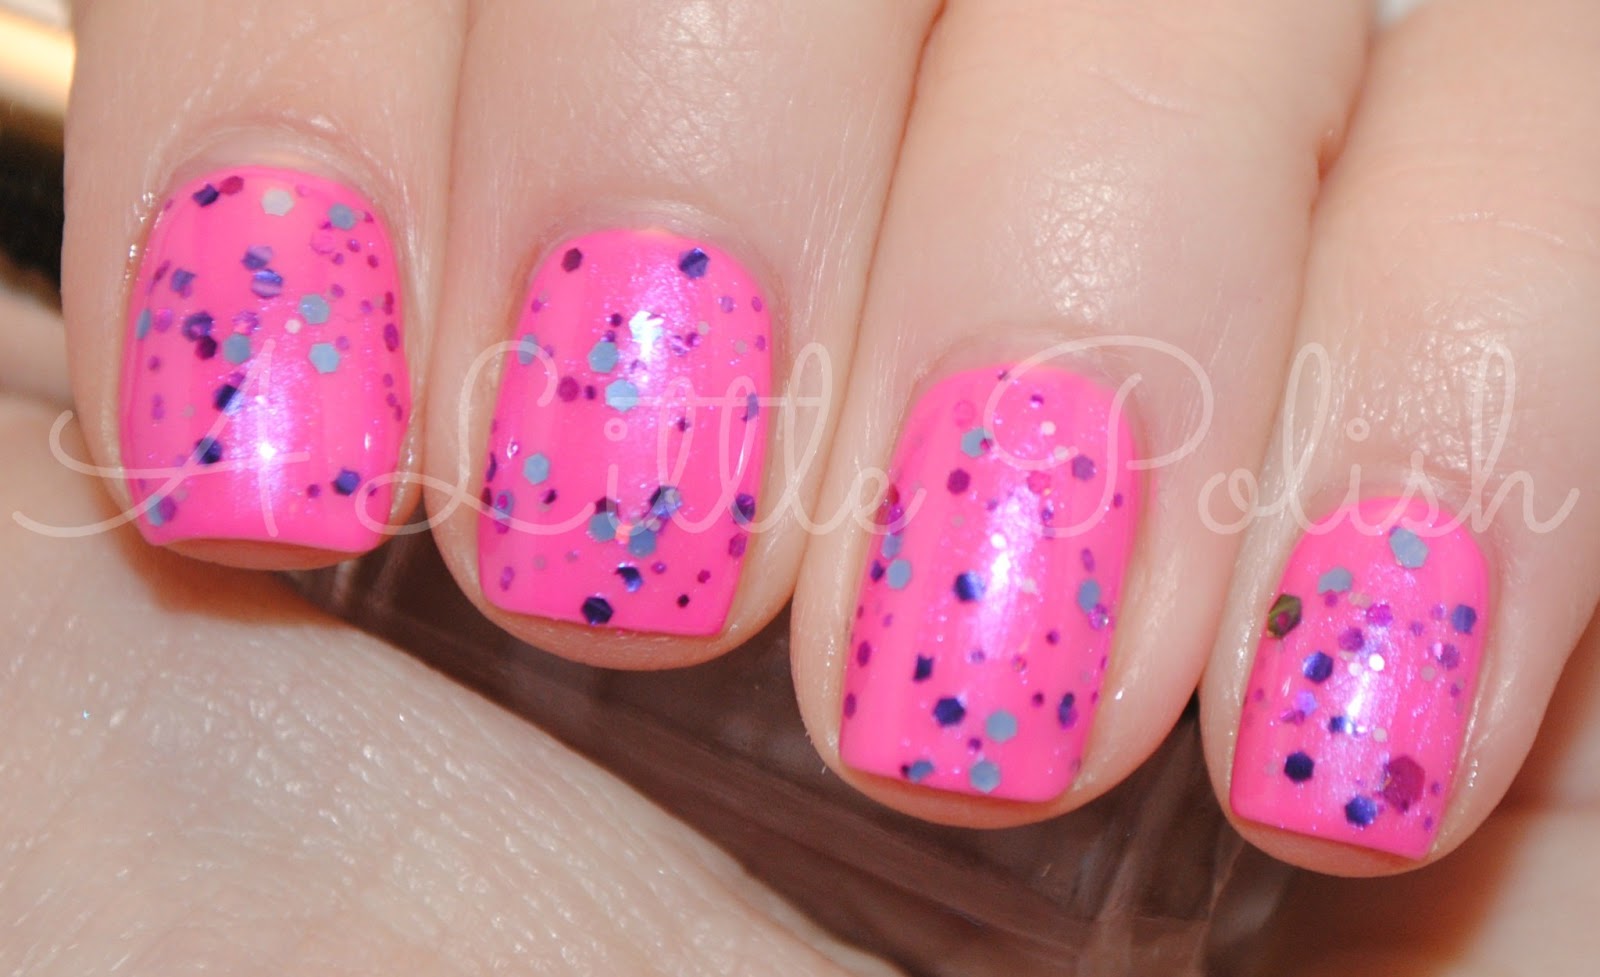 February Nail Designs with Glitter and Sparkle - wide 7